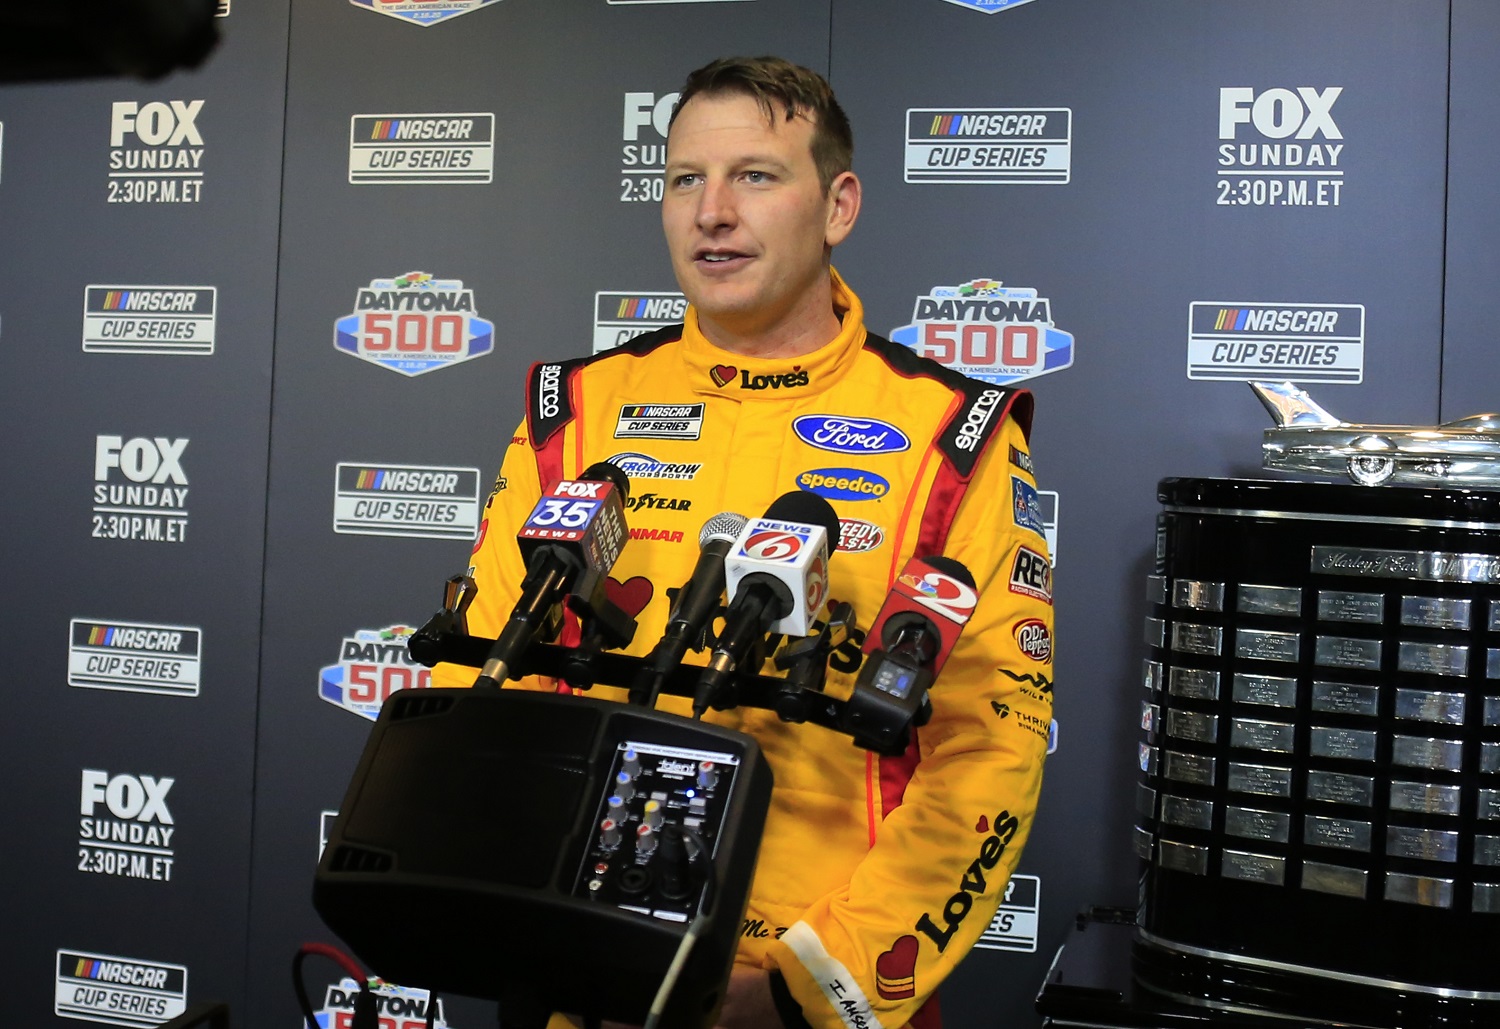 Michael McDowell was a journeyman for the first half of his NASCAR Cup Series career, but he is entering his fifth year at Front Row Motorsports and coming off his most successful season. | Jeff Robinson/Icon Sportswire via Getty Images